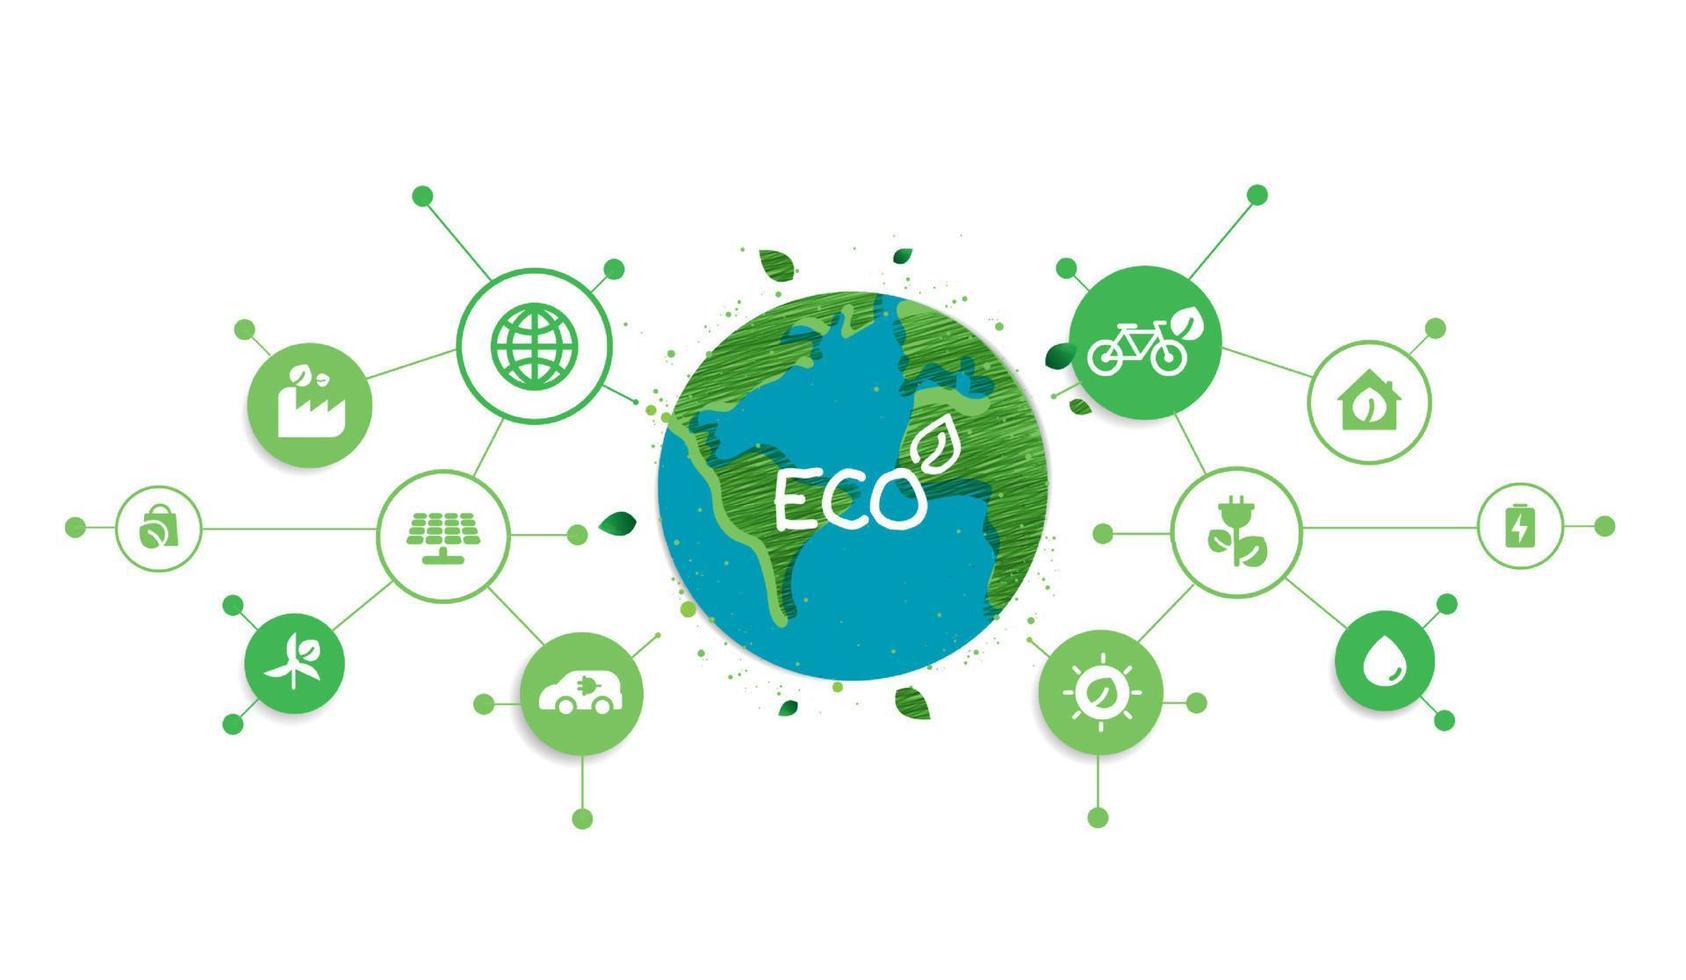 Energy saving eco technology nature concept with icons. think green ecology and save energy creative idea concept. environmentally friendly planet. vector design